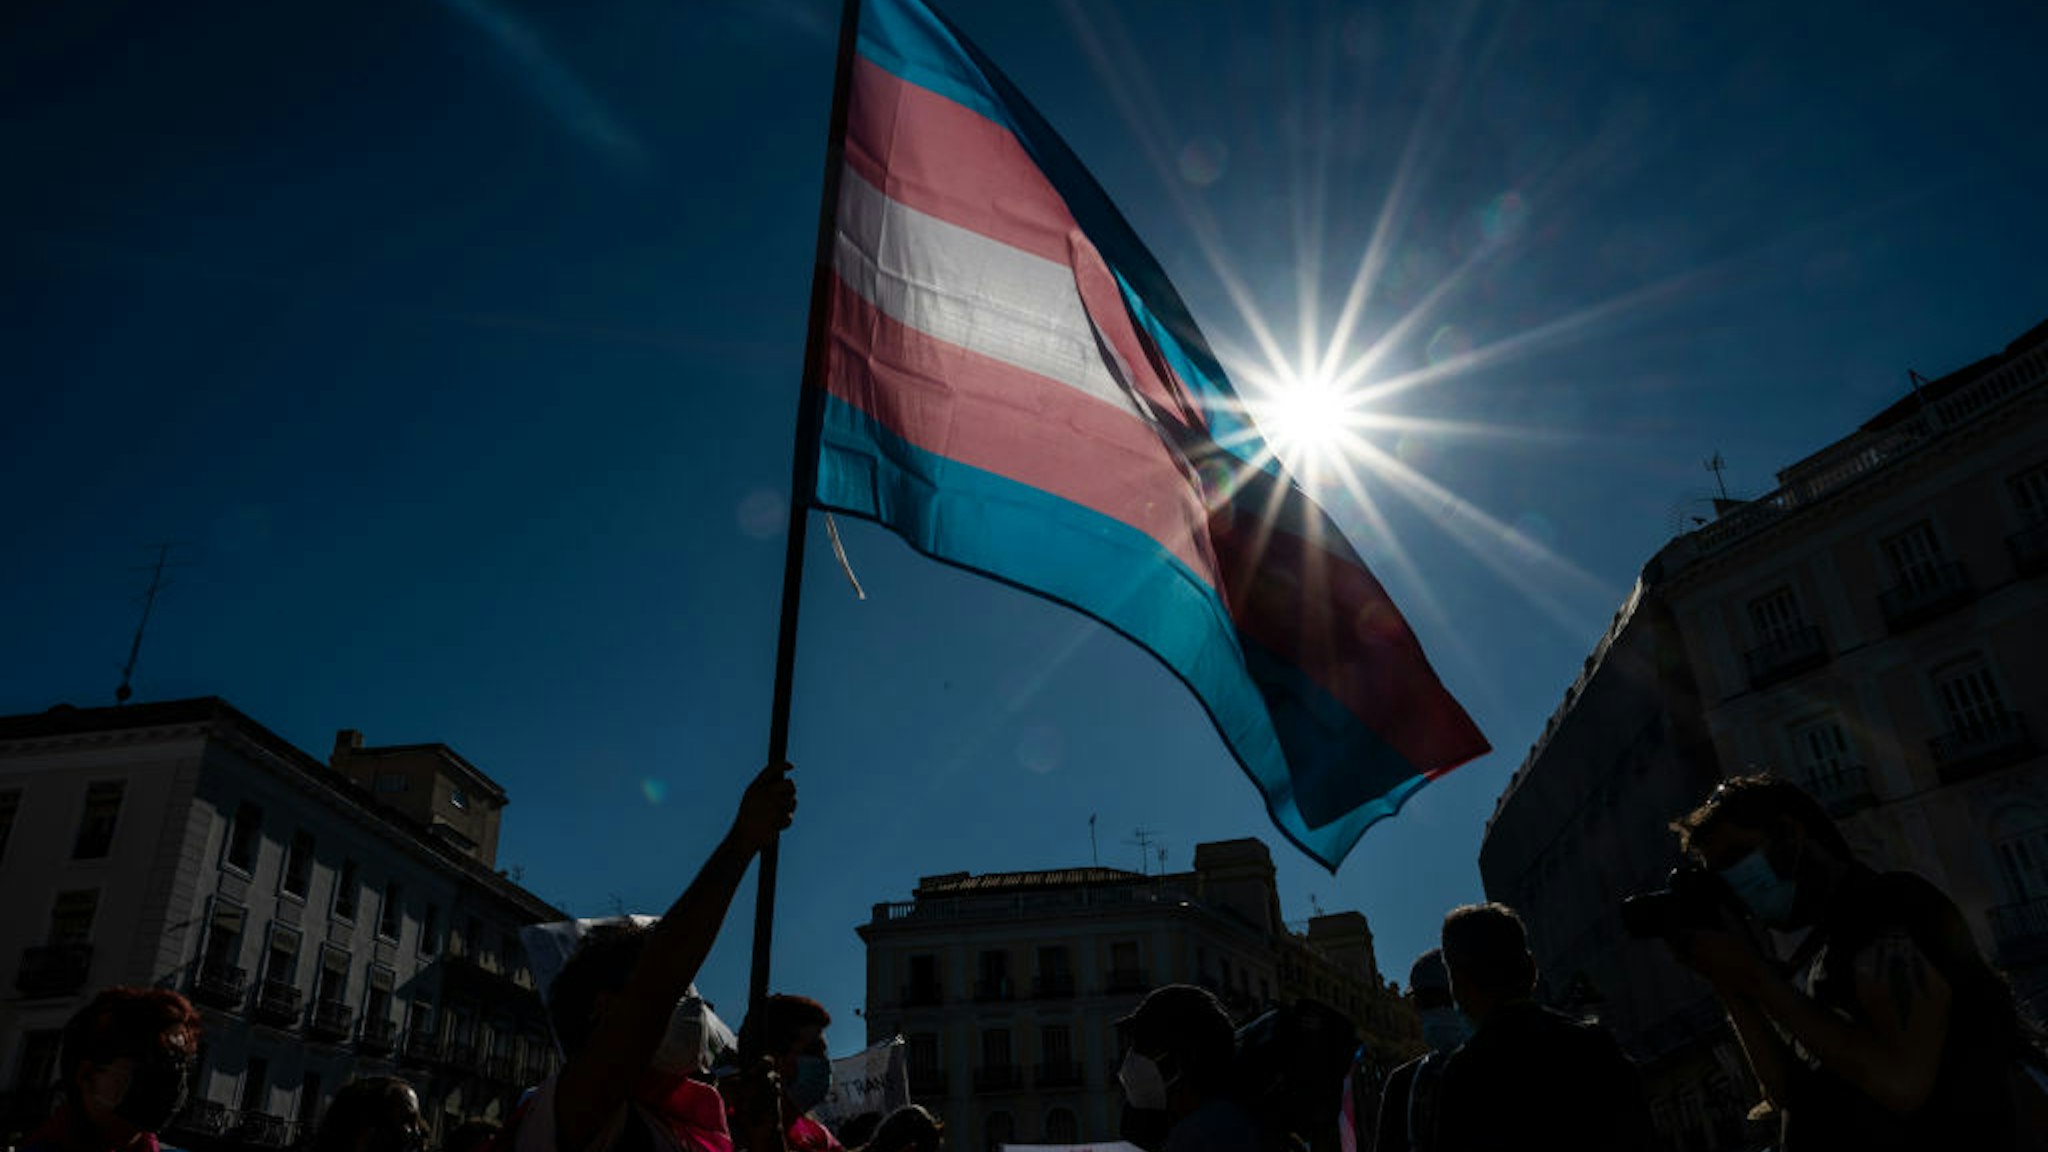 MADRID, SPAIN - 2020/07/04: Demonstrator waving the Trans flag attends a protest where Trans community demand a state law that will guarantee gender self-determination. The protest coincides with the Pride celebrations that are taking place this week. (Photo by Marcos del Mazo/LightRocket via Getty Images)